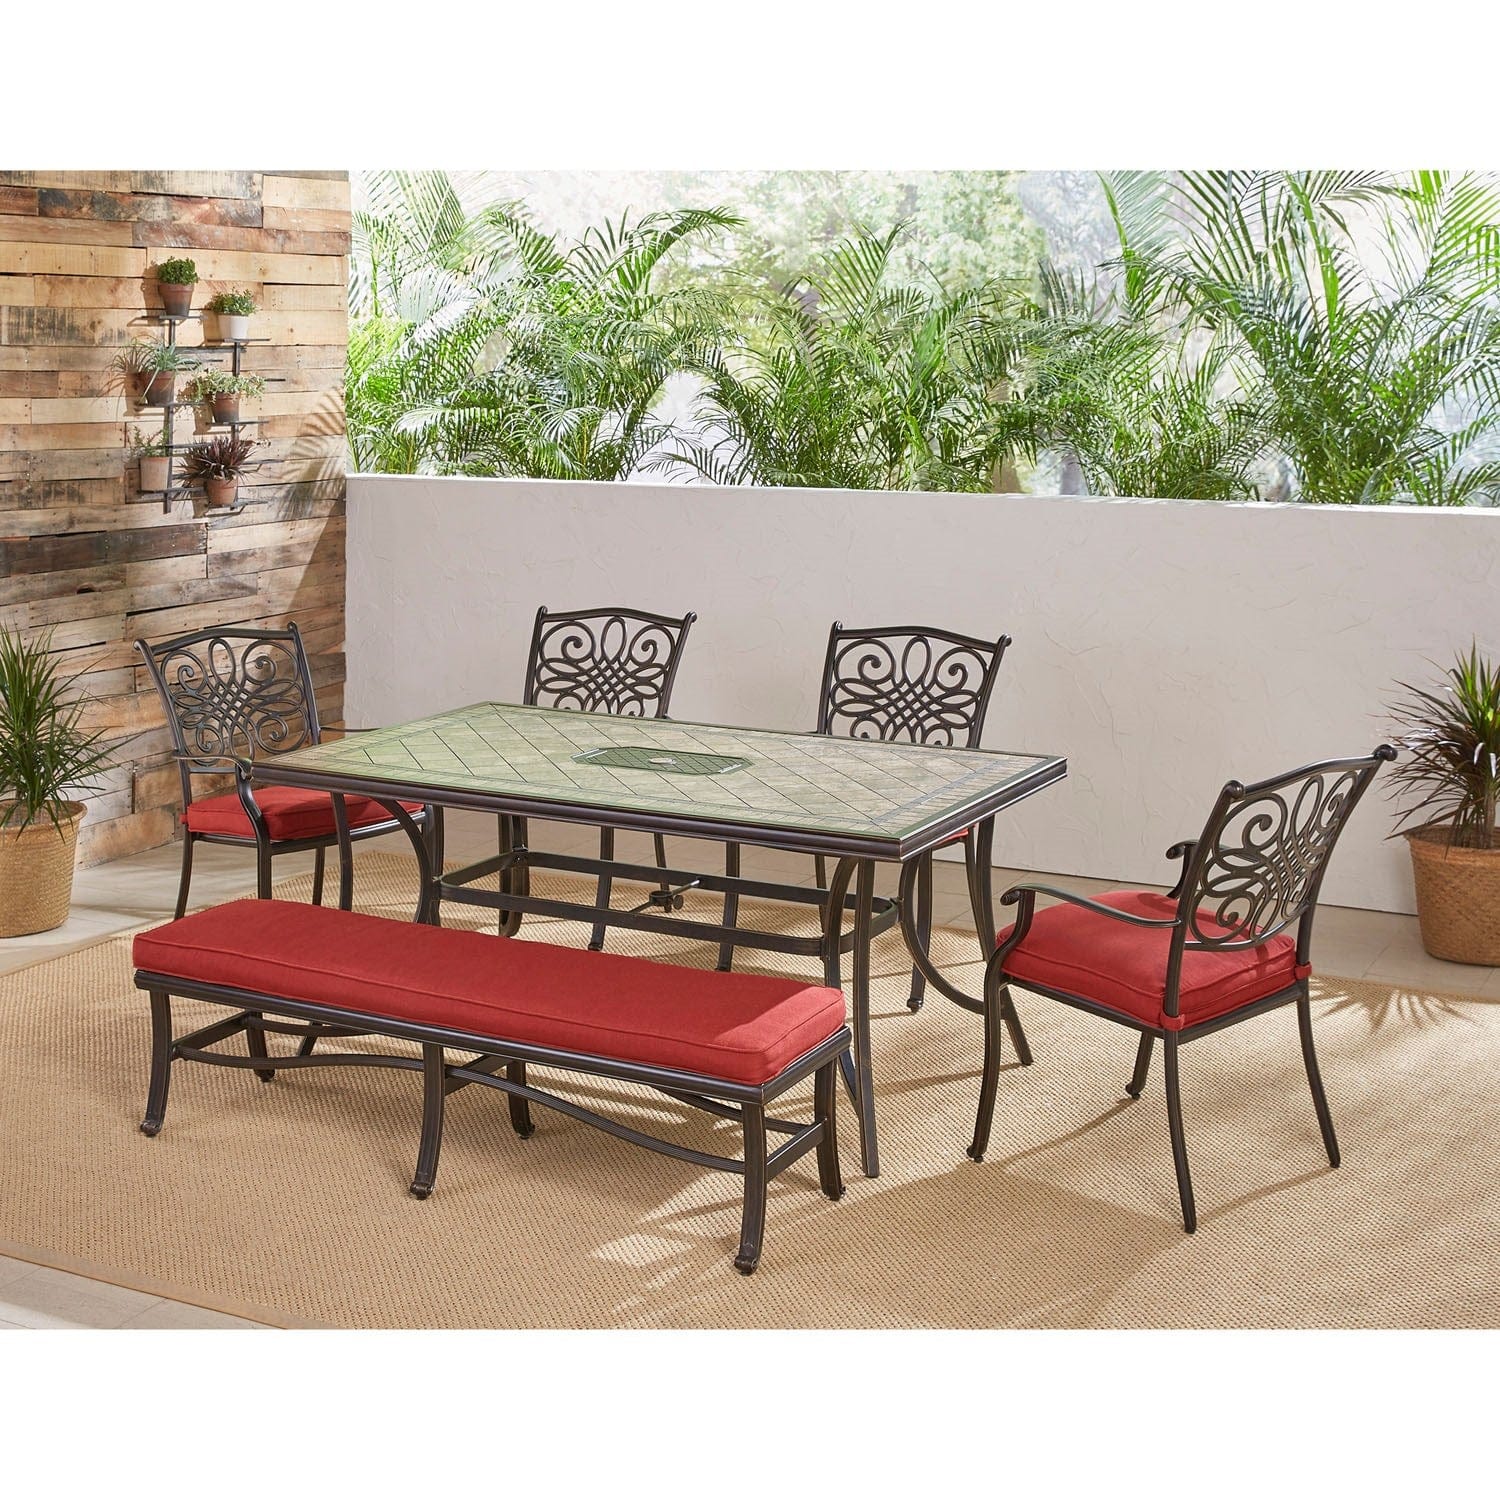 Hanover Outdoor Dining Set Hanover - Monaco 6-Piece Patio Dining Set in Red with Four Dining Chairs, 1 Bench, and a 40" x 68" Tile-Top Table | MONDN6PCBN-RED